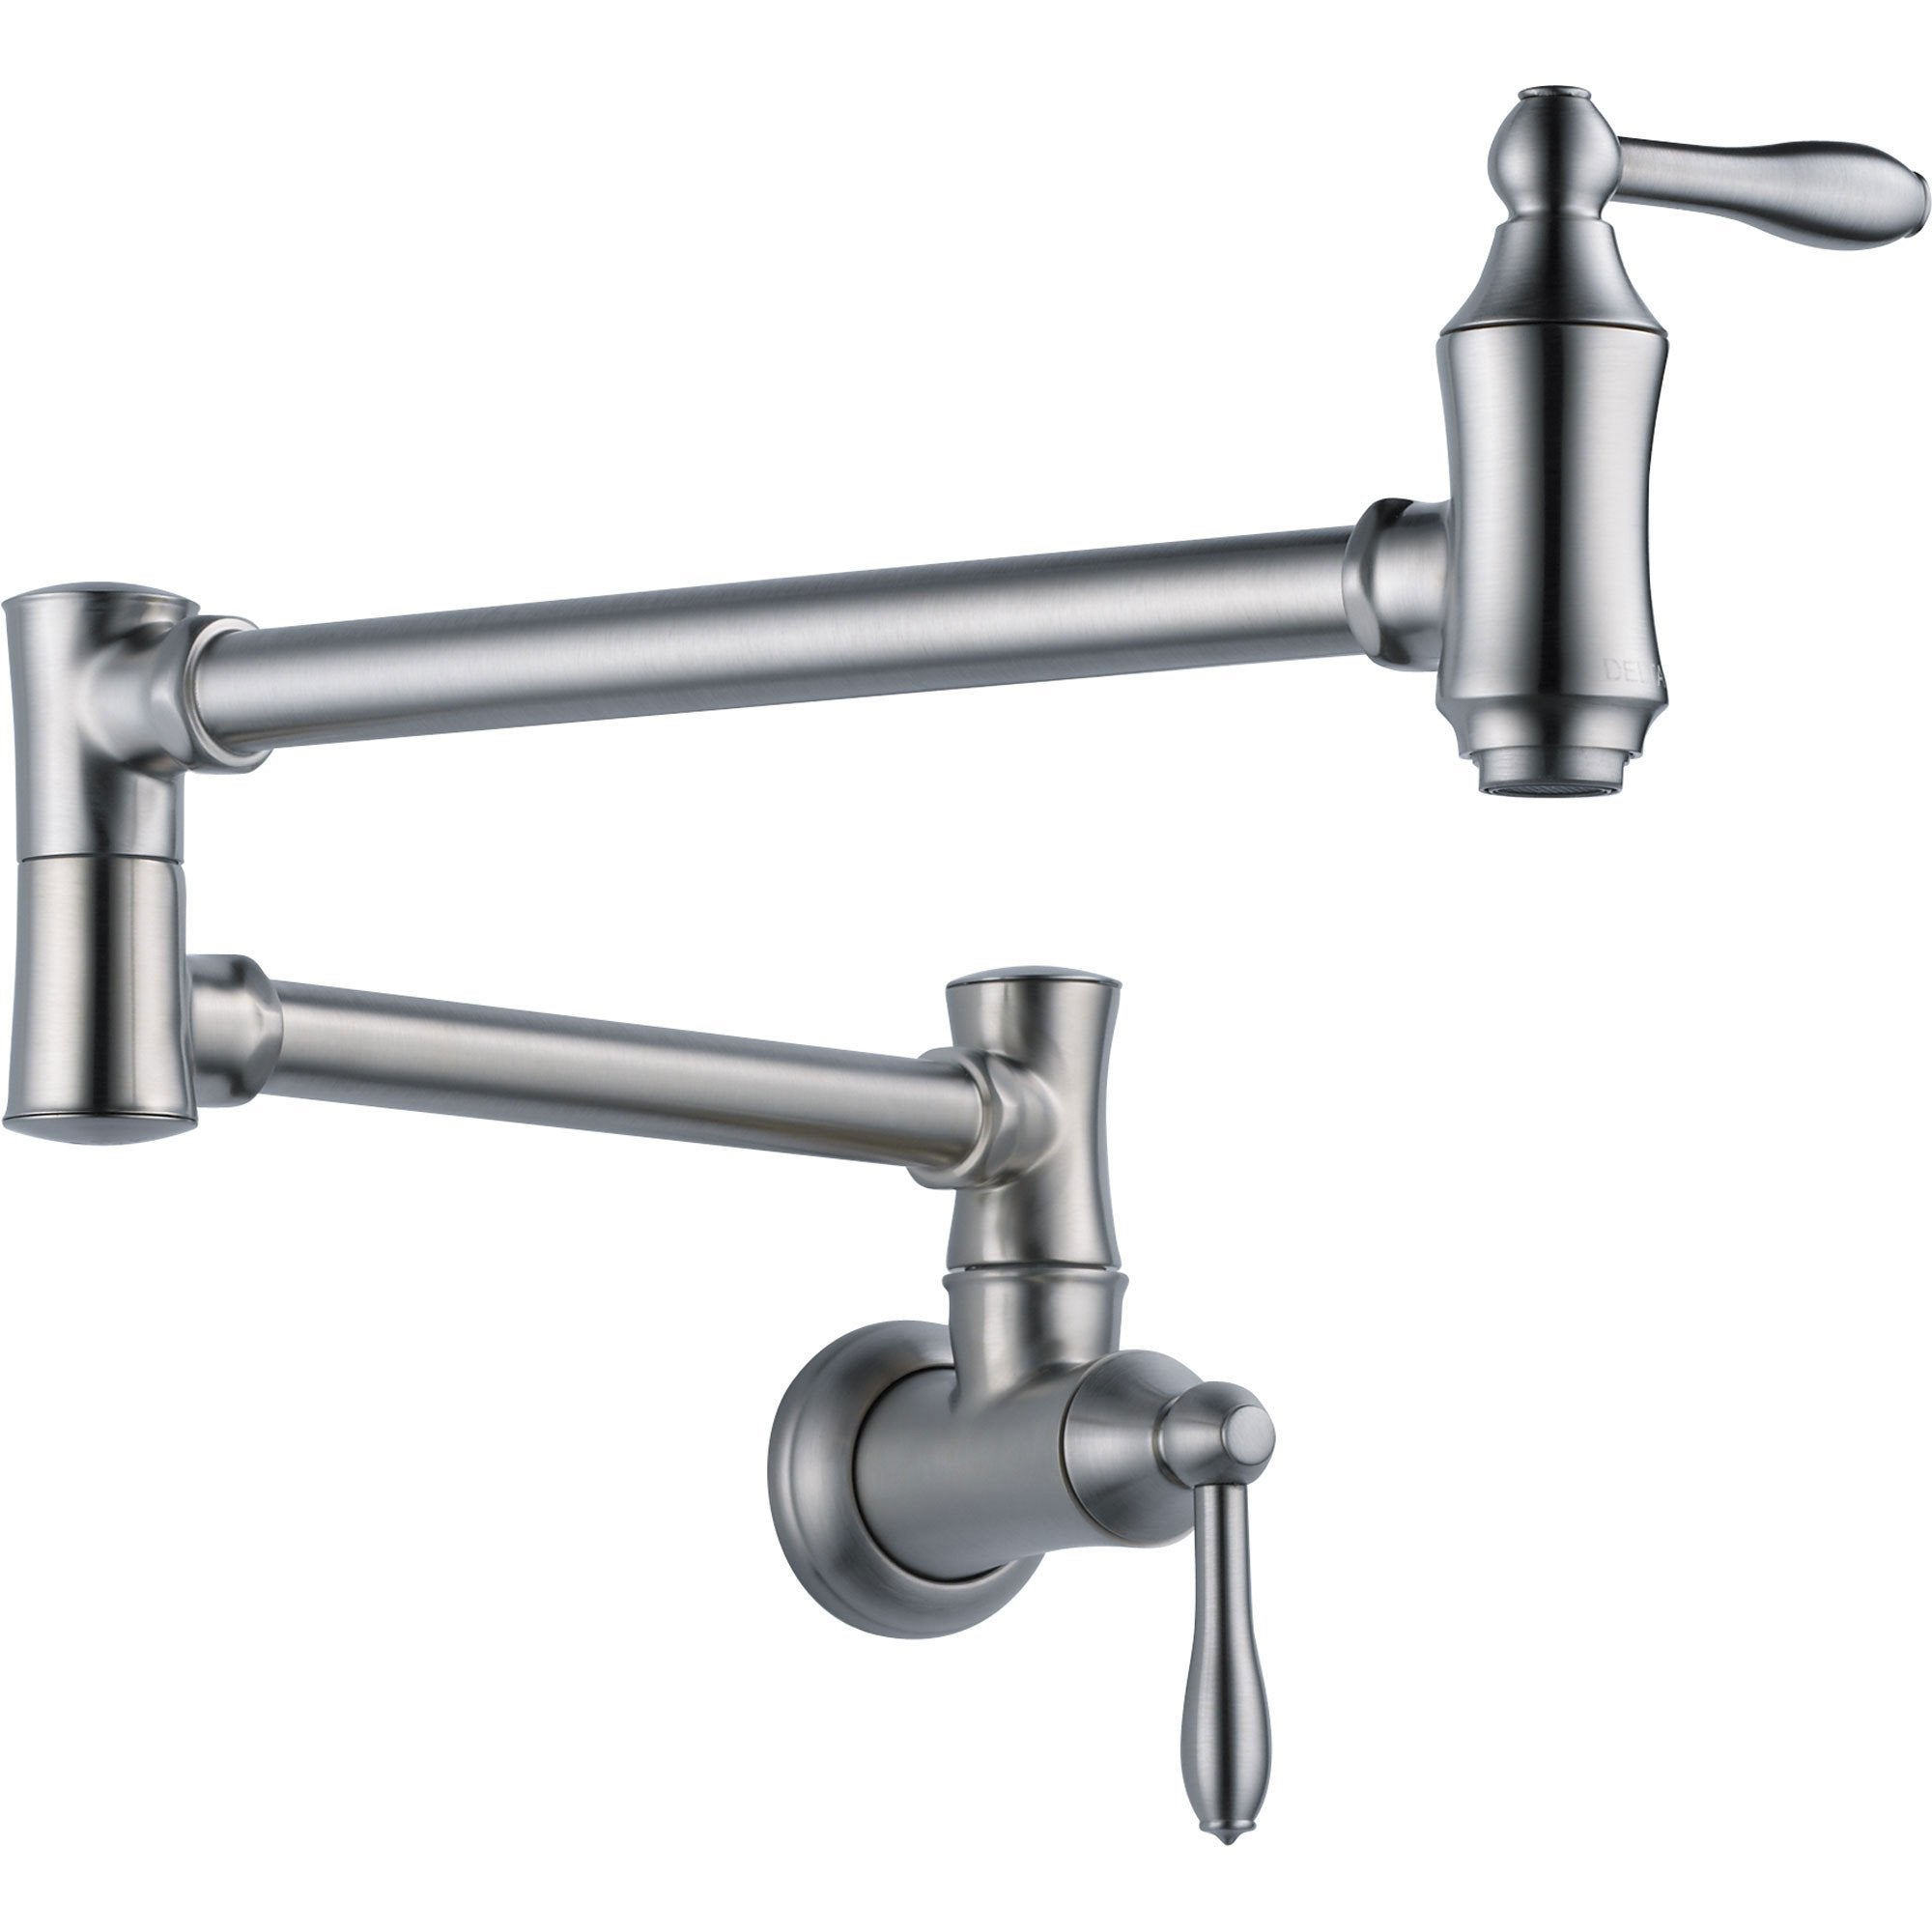 Delta Traditional Kitchen Wall Mounted Arctic Stainless Pot filler Faucet 628907